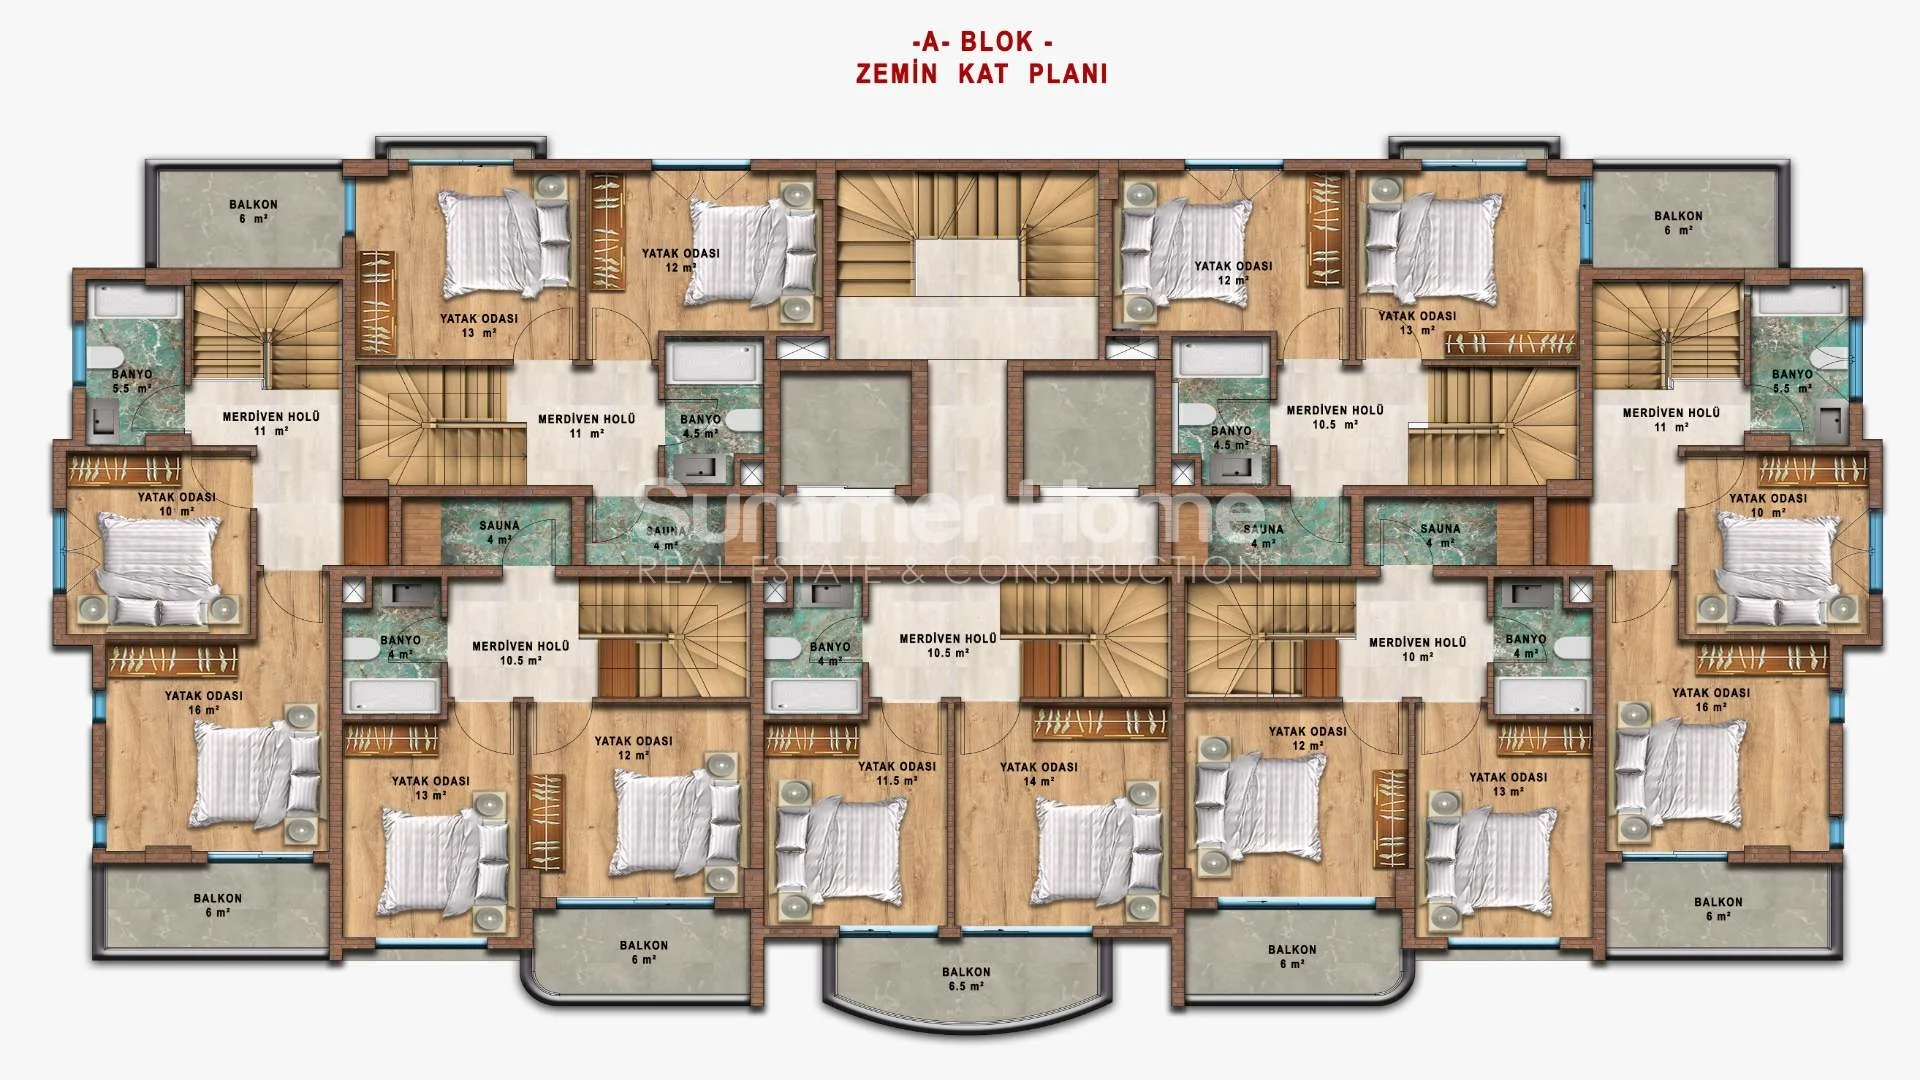 Exquisite Sea View Apartments For Sale in Turkler Plan - 46